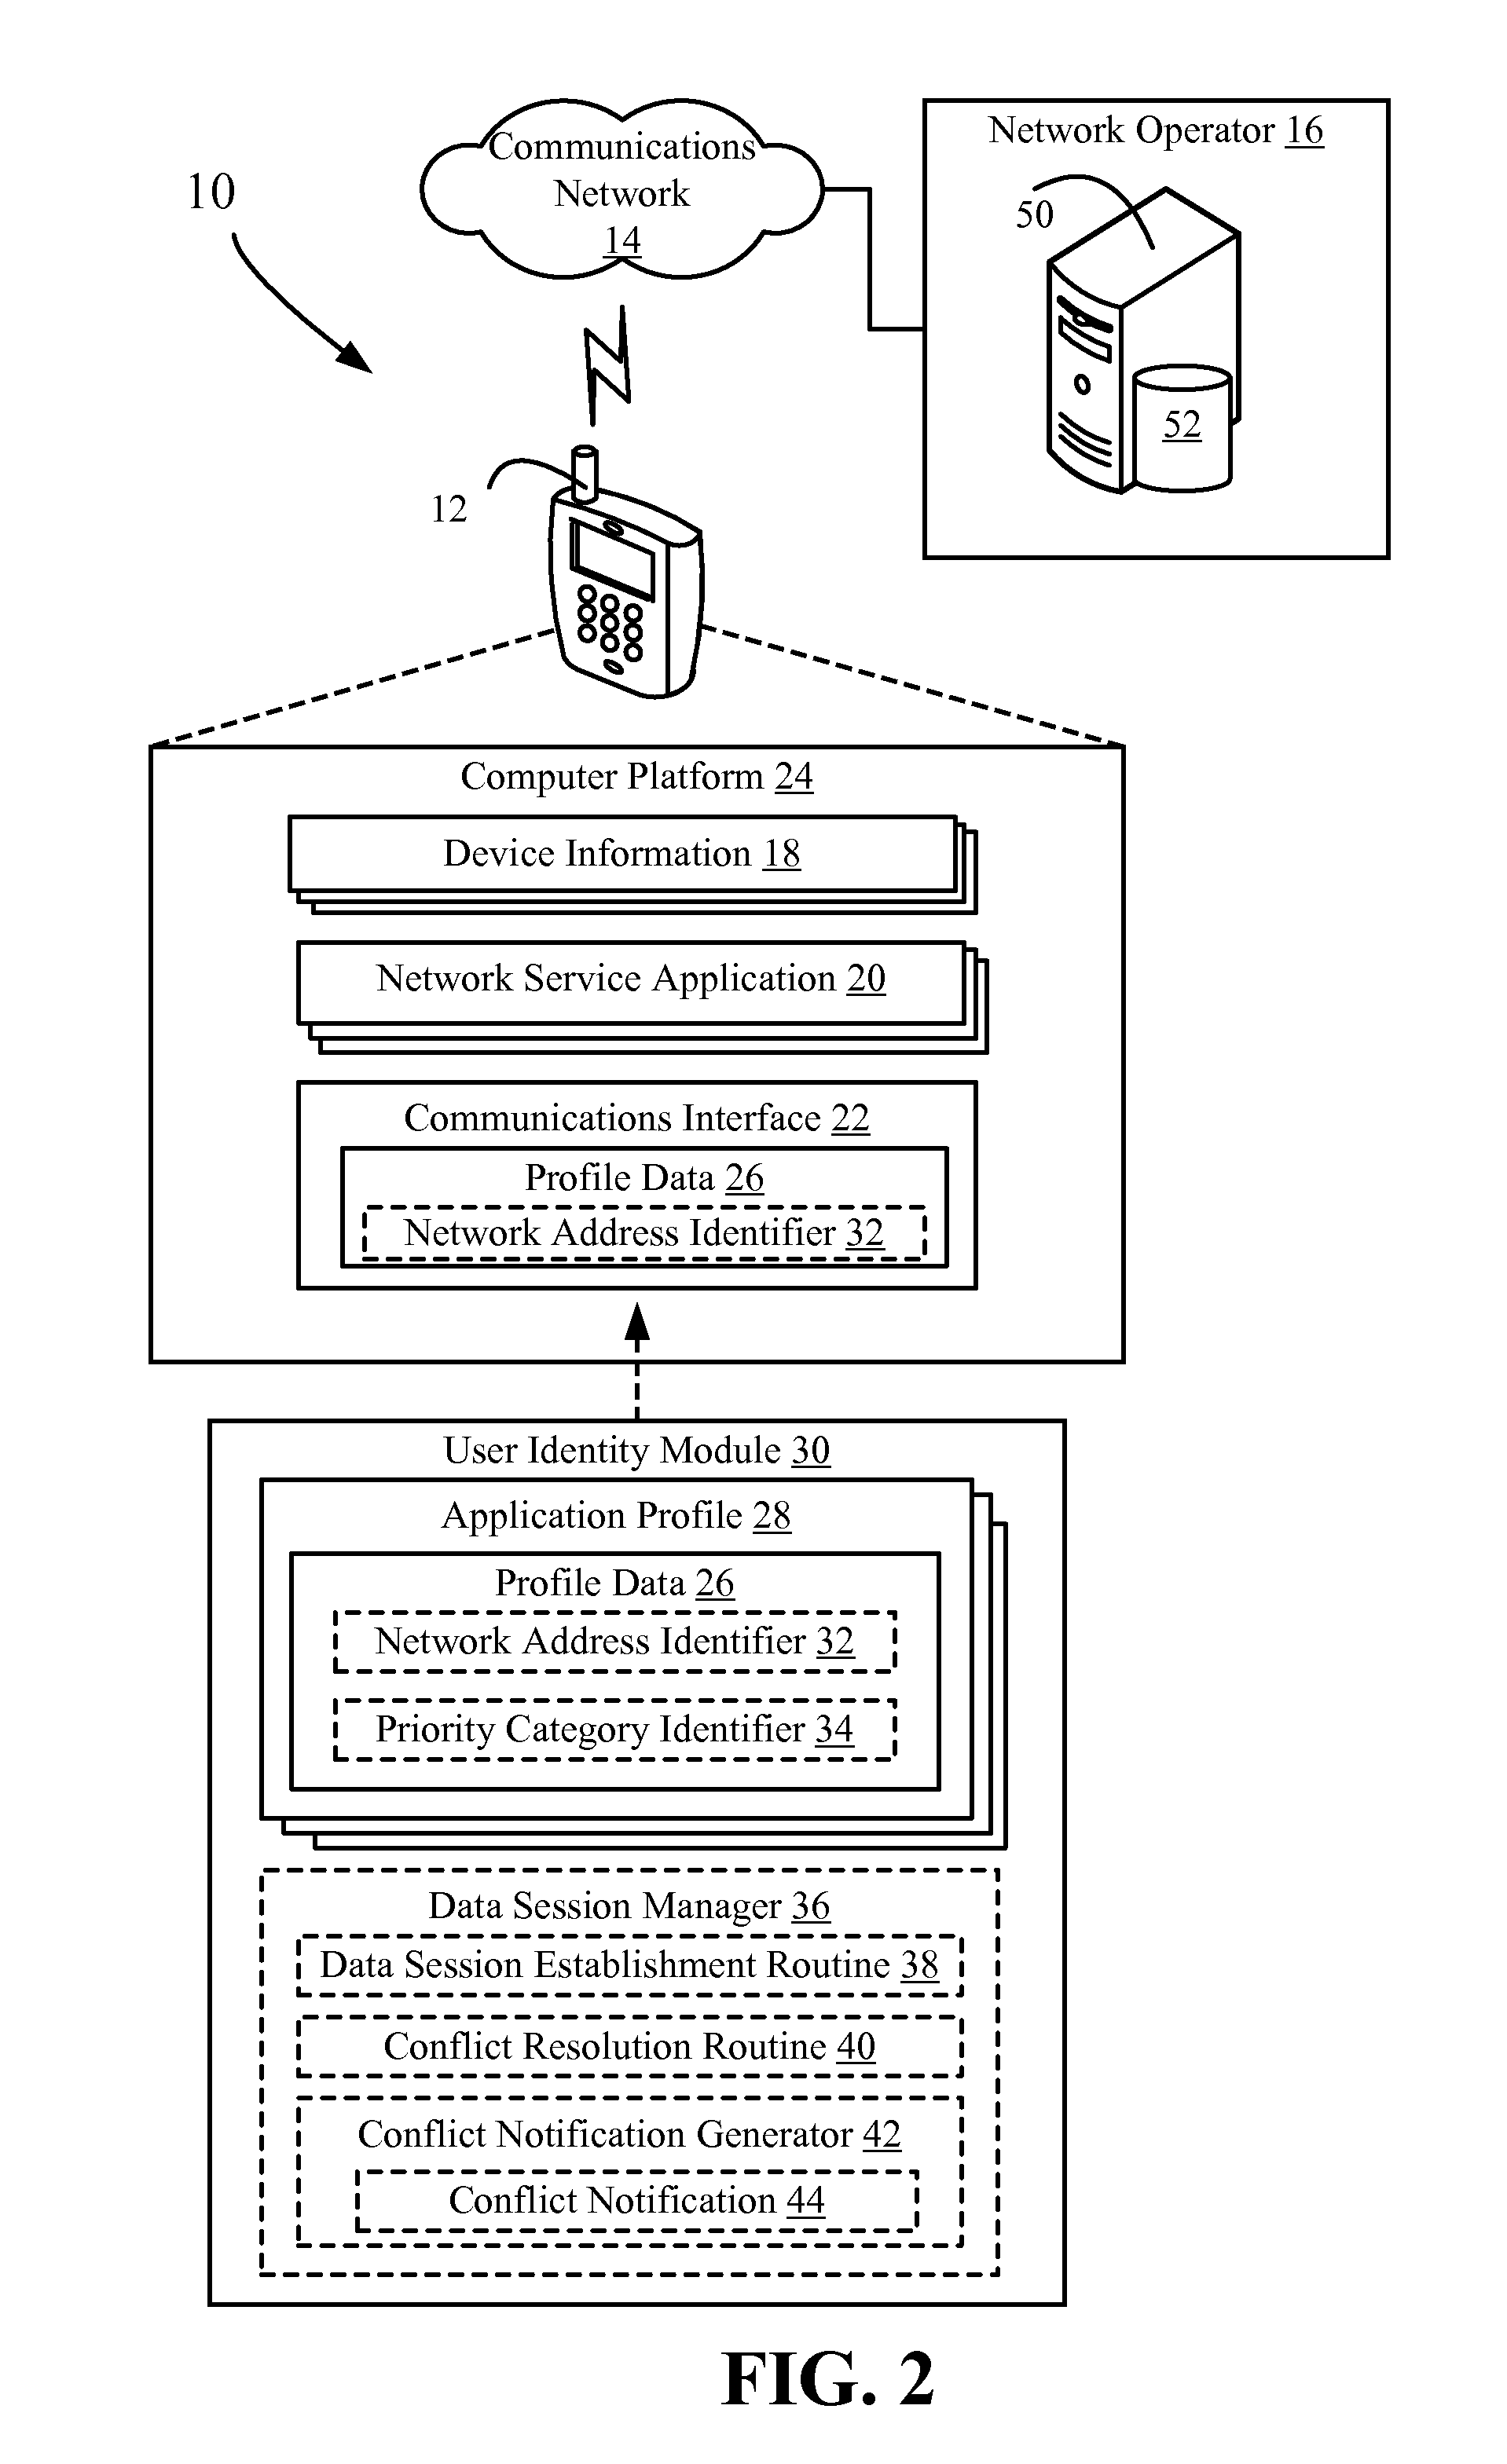 Apparatus and methods associated with open market handsets